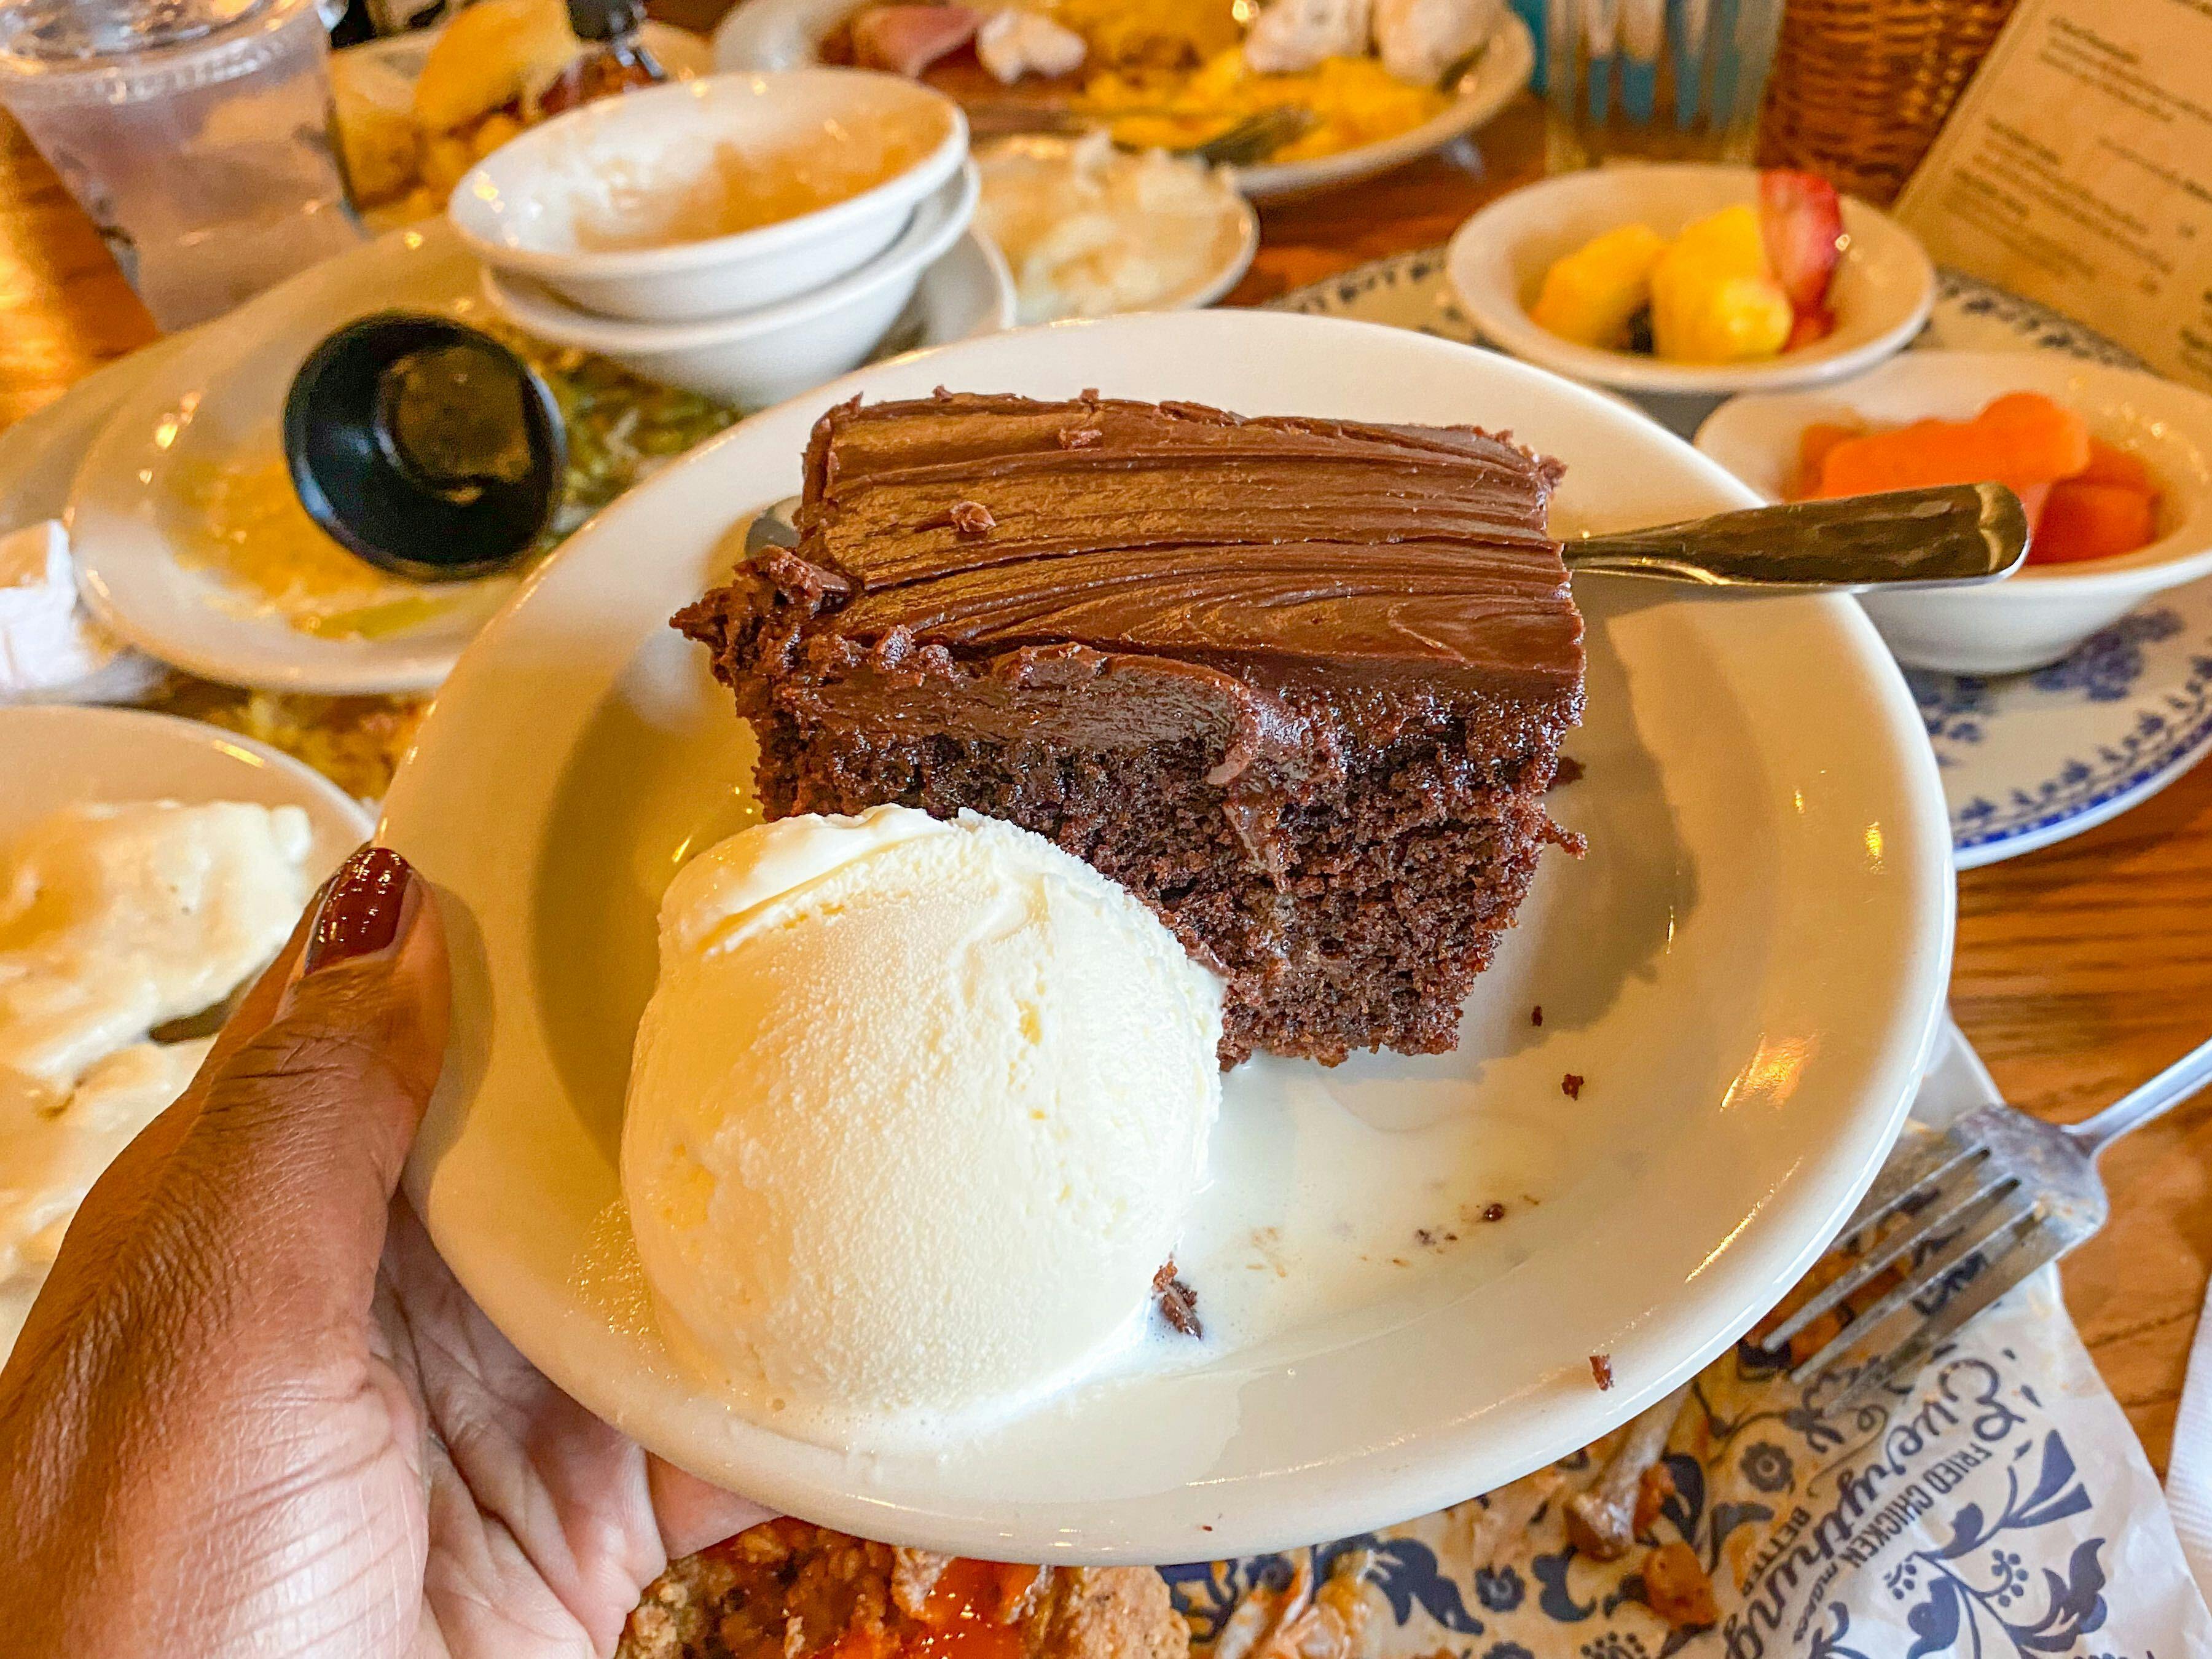 A person's hand holding up a plate with a Cracker Barrel brownie and ice cream dessert on it.